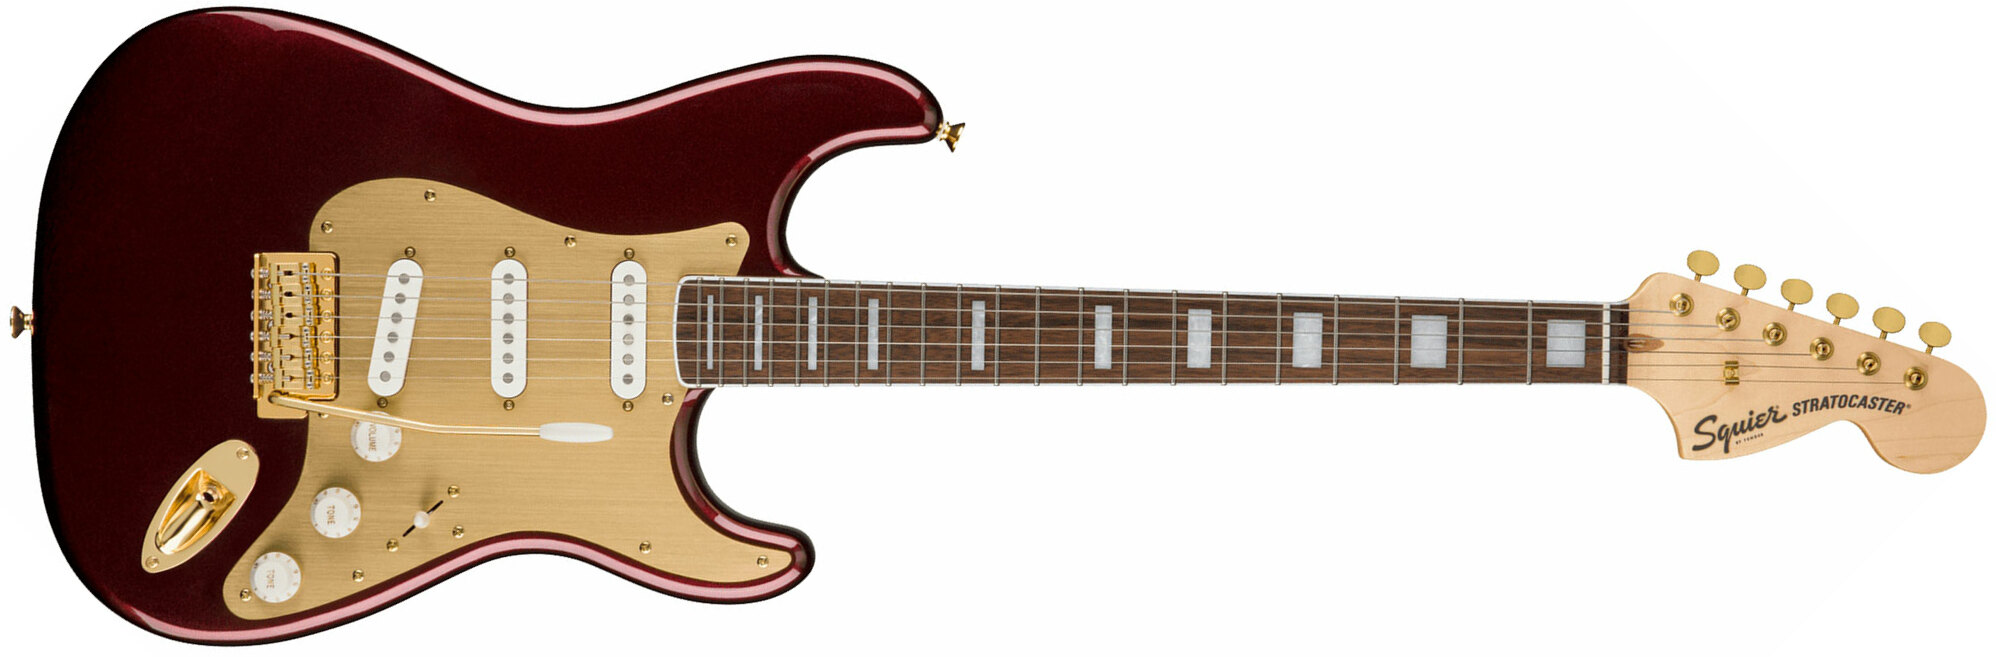 Squier Strat 40th Anniversary Gold Edition Lau - Ruby Red Metallic - Str shape electric guitar - Main picture